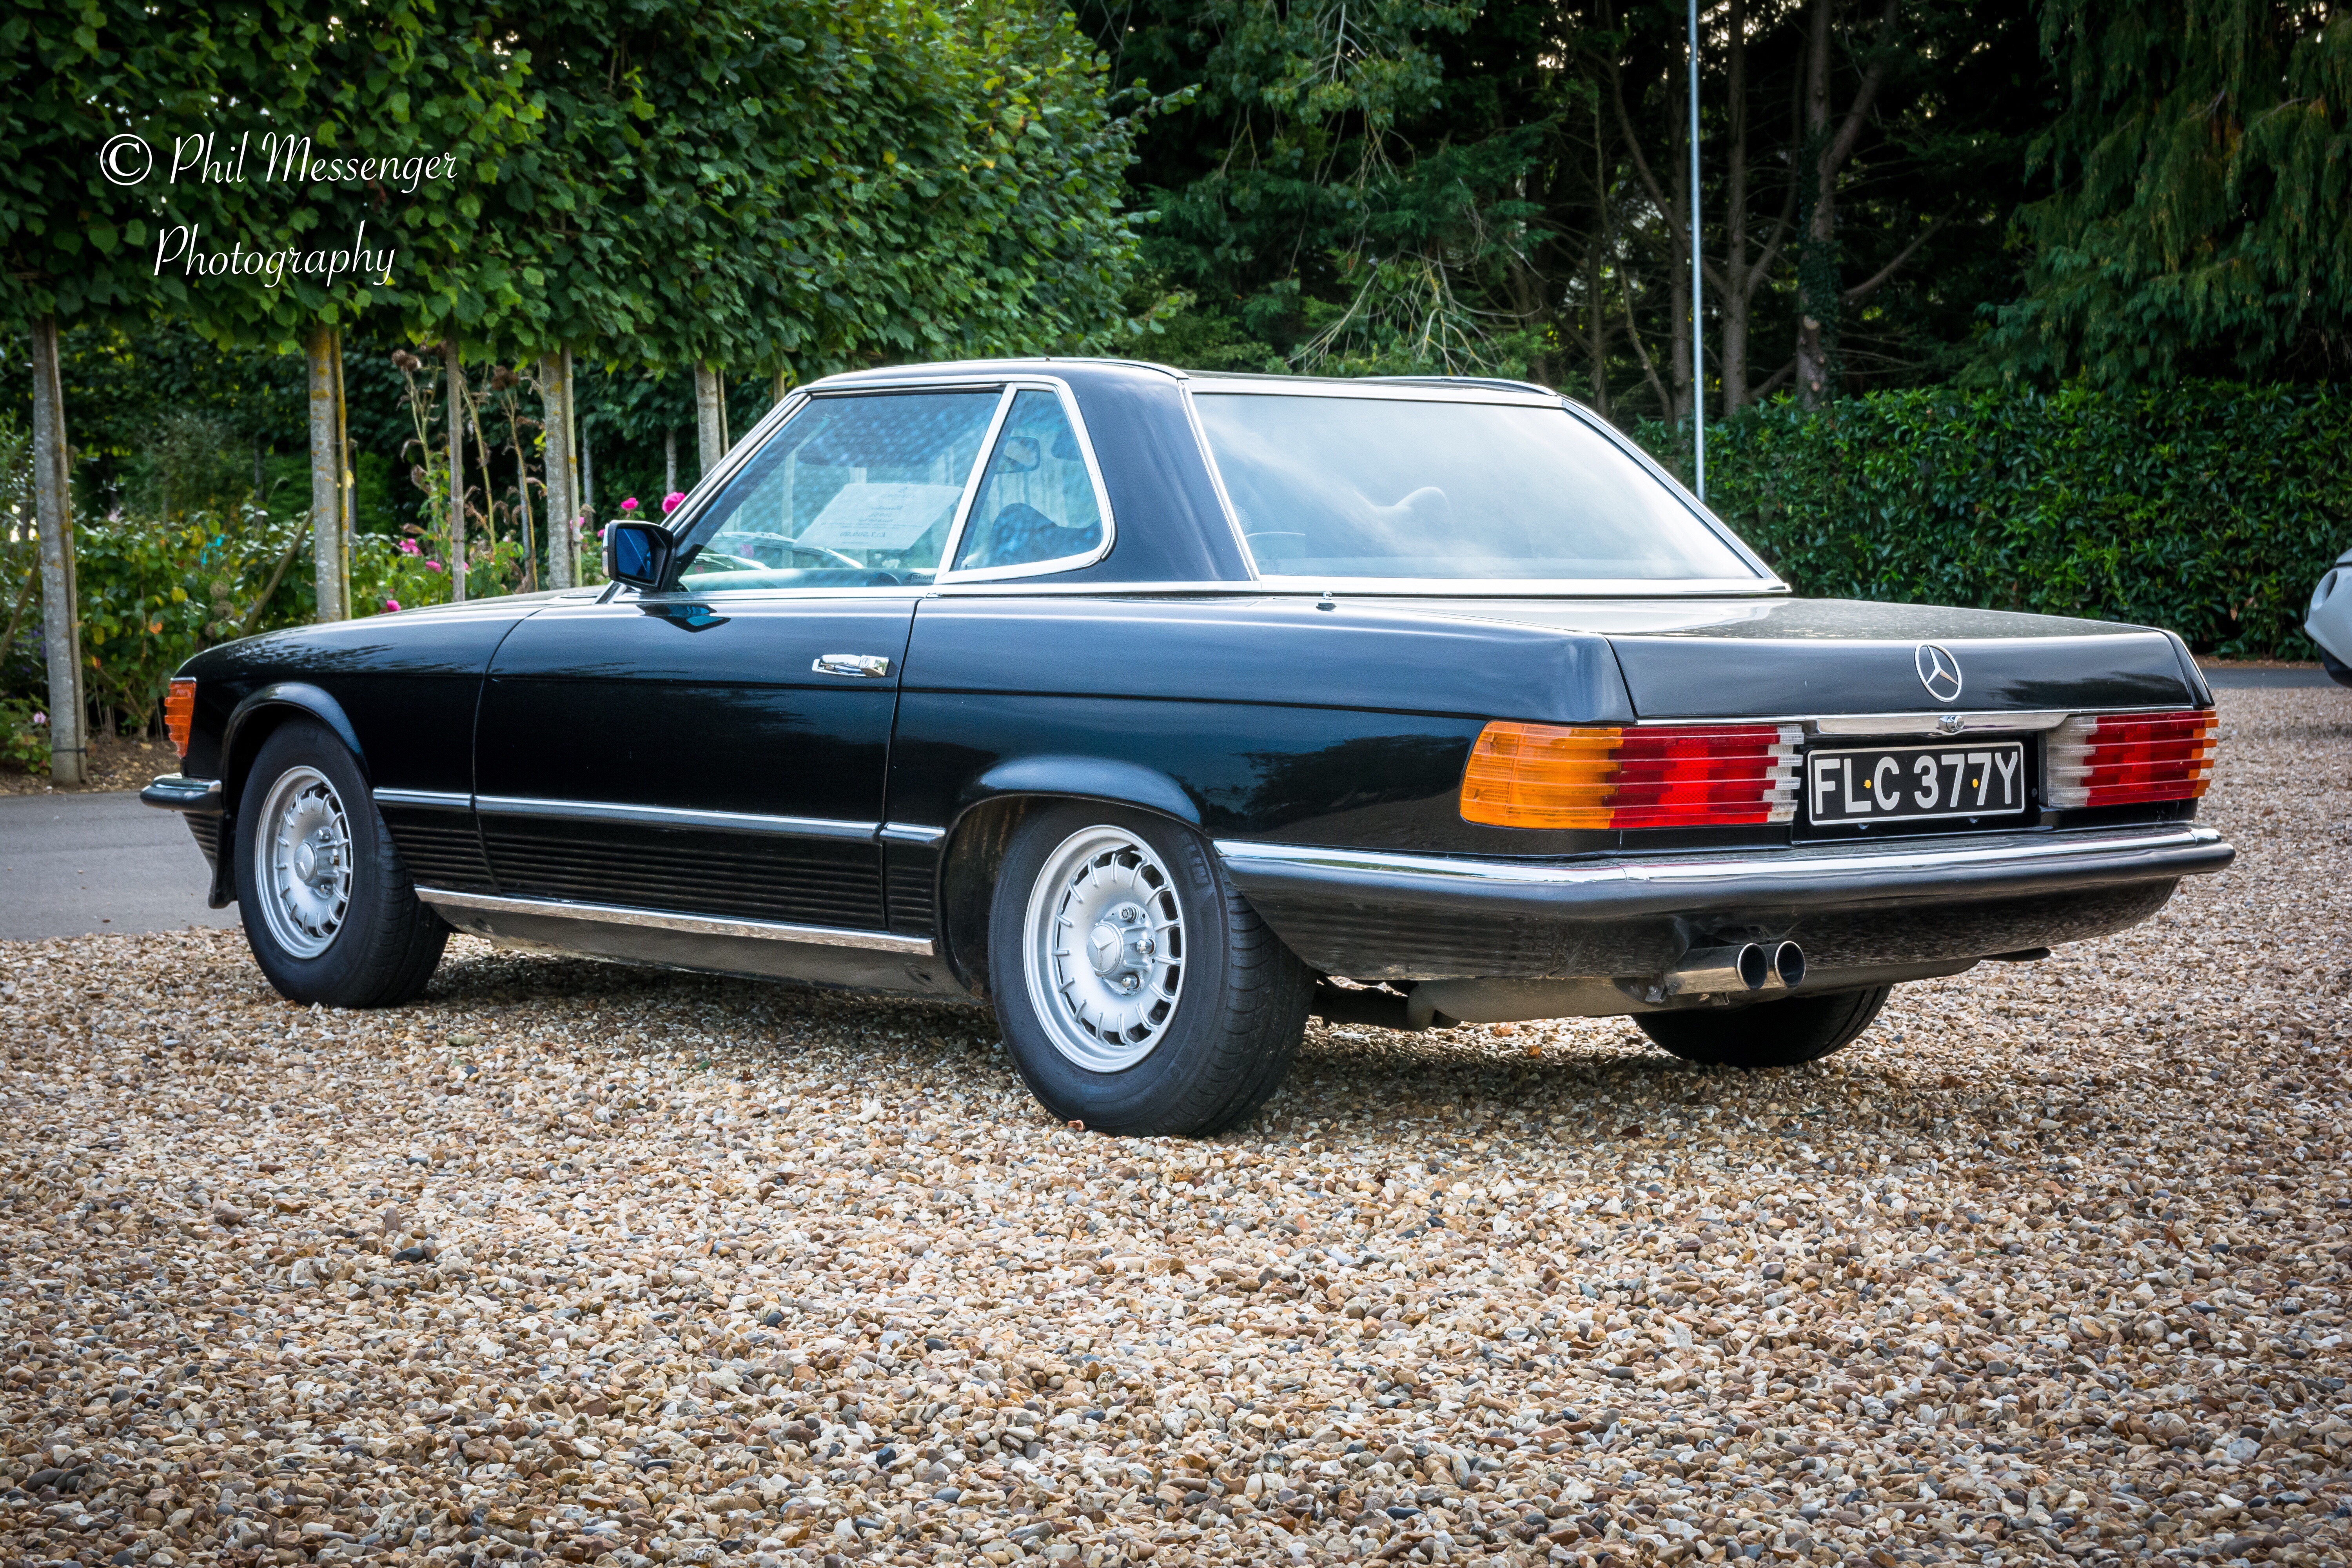 Spotted this beautiful 1982 Mercedes 500SL at Burford Garden Company. 